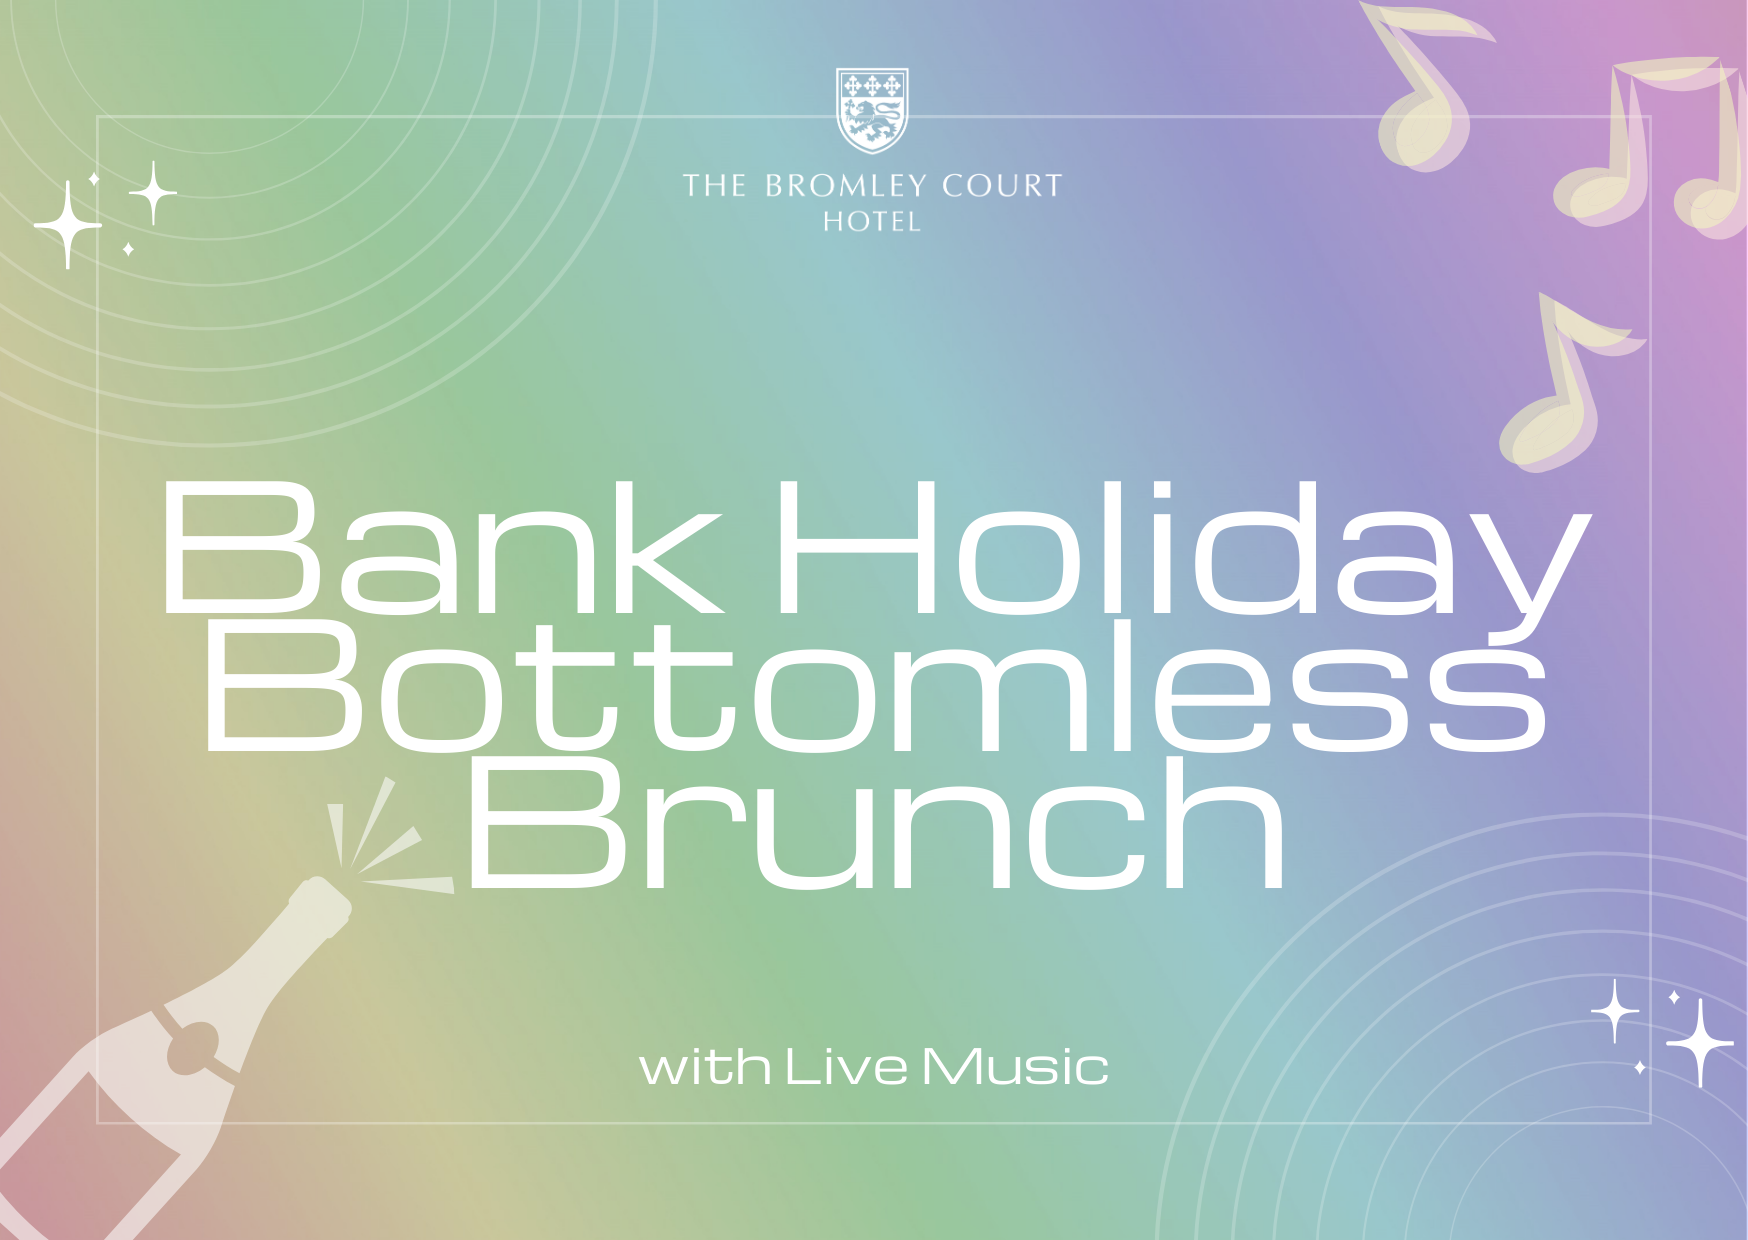 Bank Holiday Bottomless Brunches at The Bromley Court Hotel